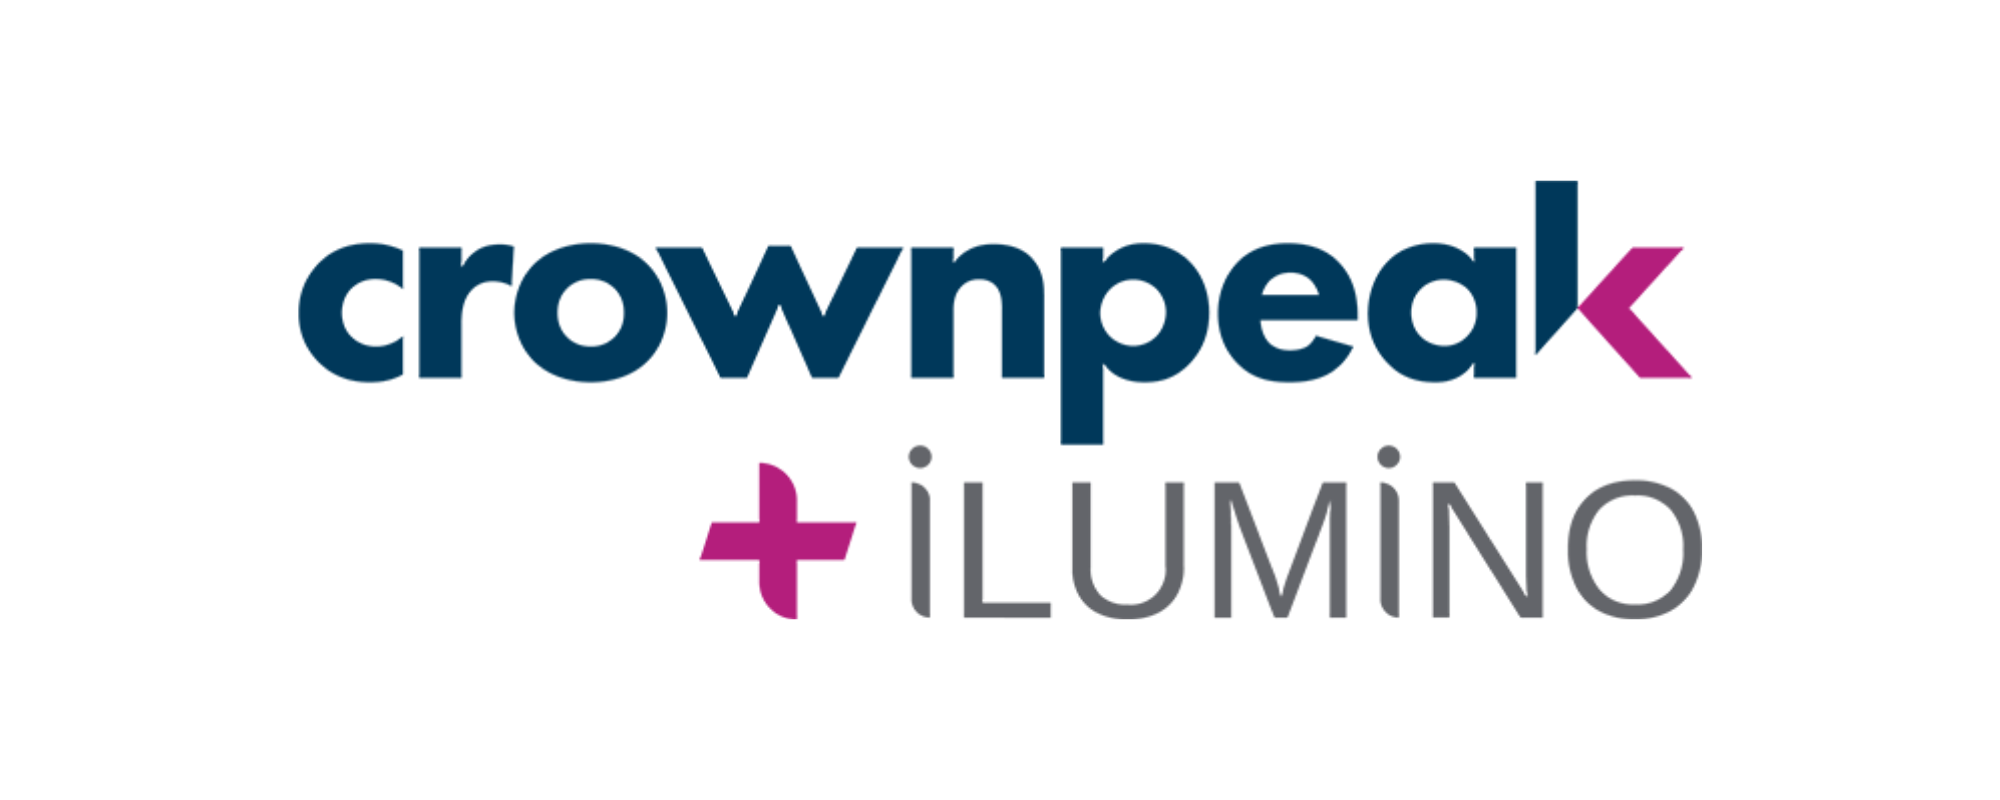 Crownpeak + ilumino: A Joint Solution for Full-Coverage, Scalable Digital Accessibility